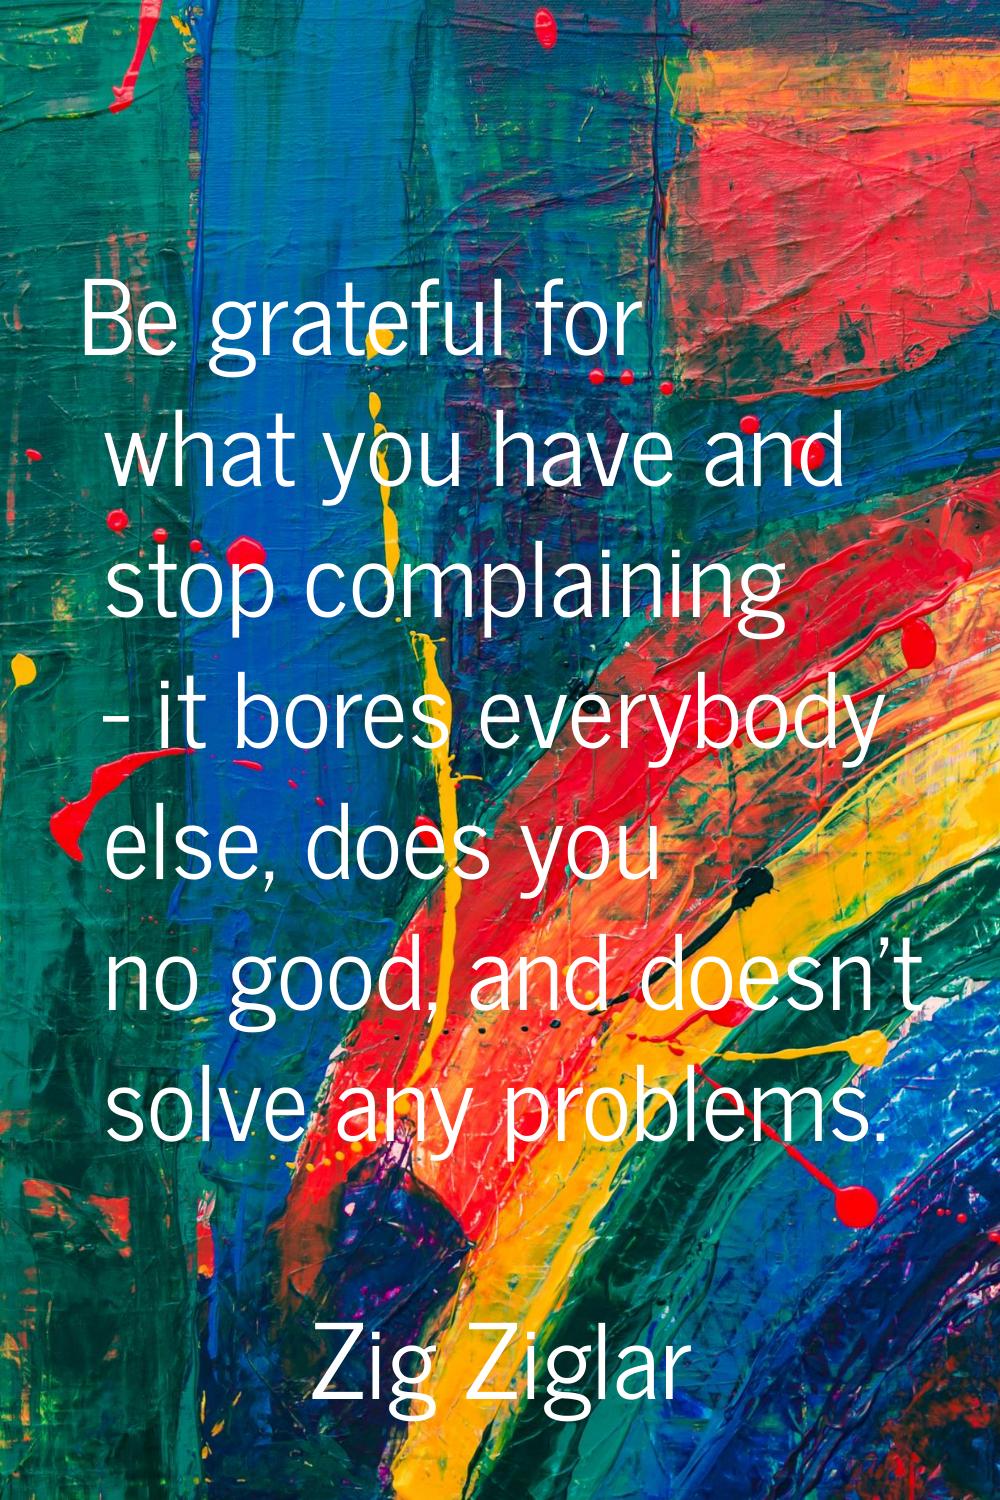 Be grateful for what you have and stop complaining - it bores everybody else, does you no good, and